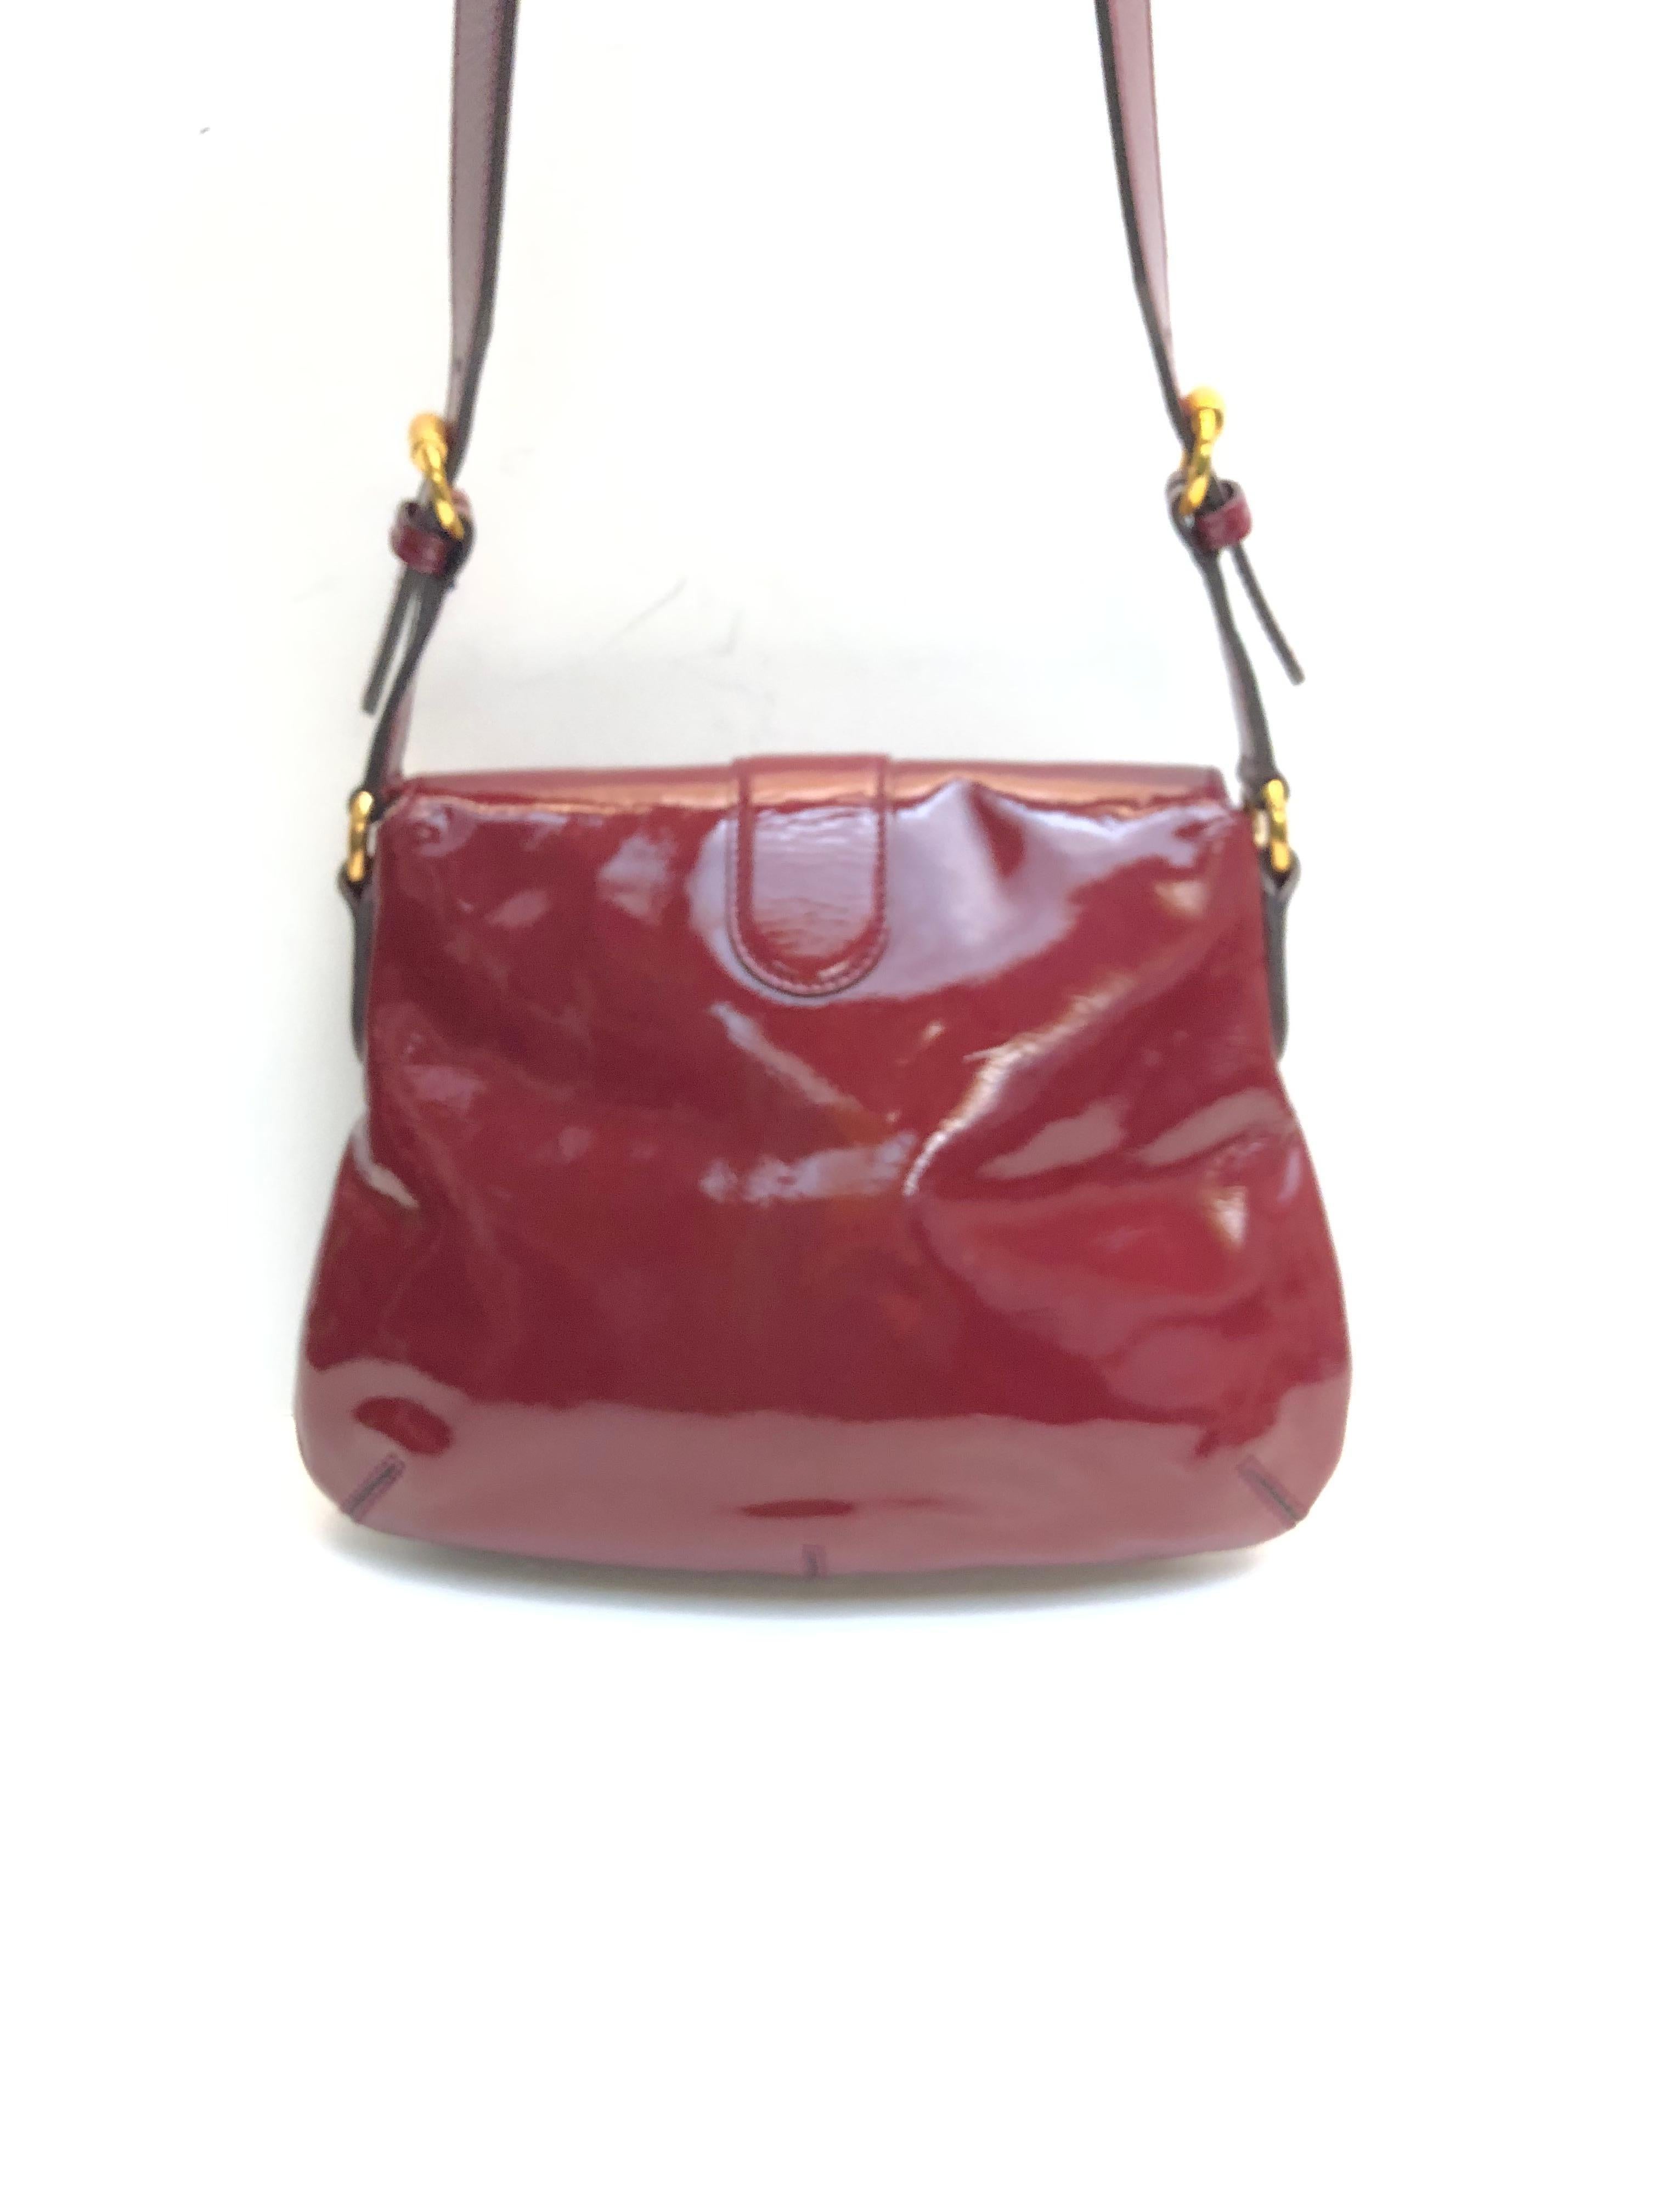 Gucci red patent leather gold hardware flap shoulder bag  In Excellent Condition For Sale In Sheung Wan, HK